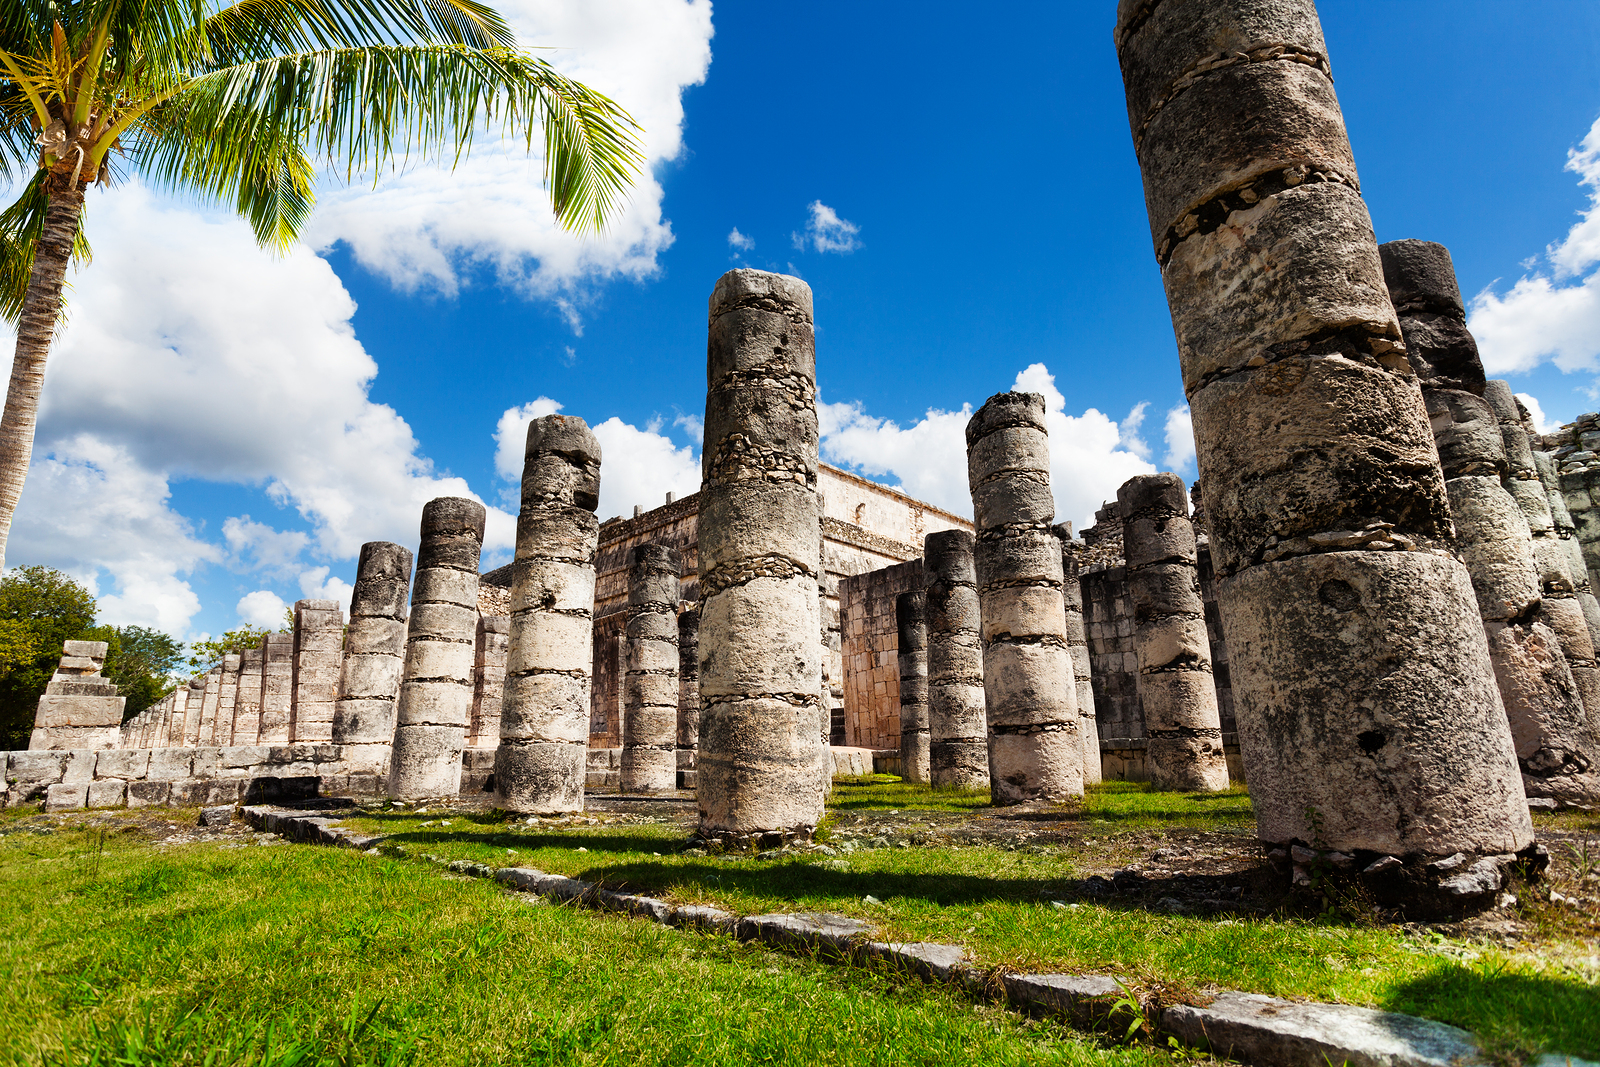 The ruins of the ancient Mayan city of Tulum